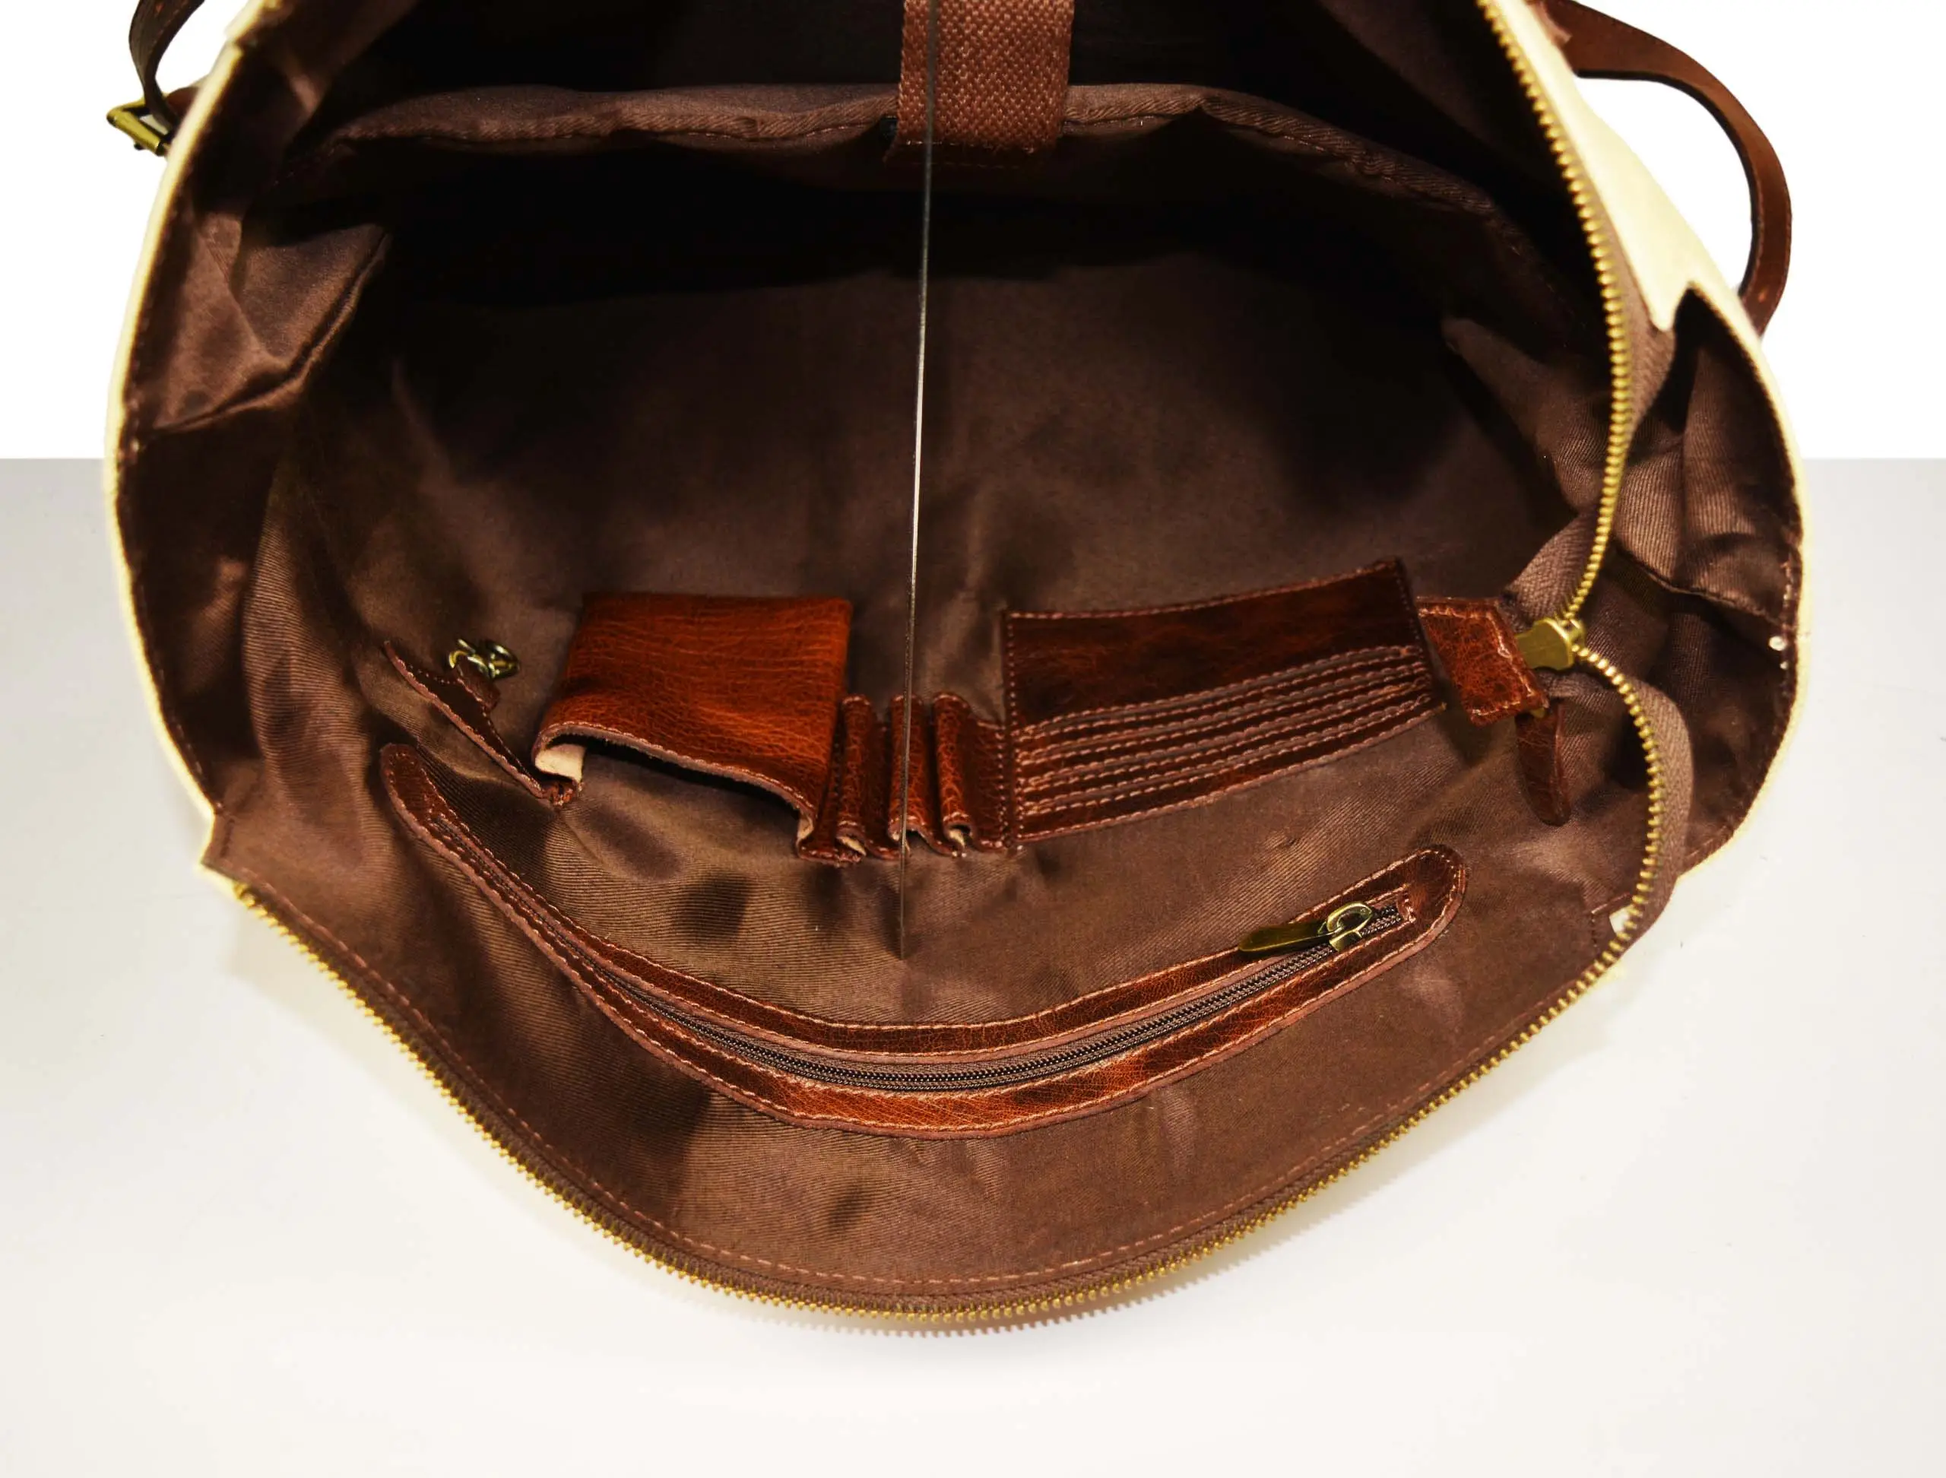 Leather Canvas BackPack - Rucksack Macaroon open